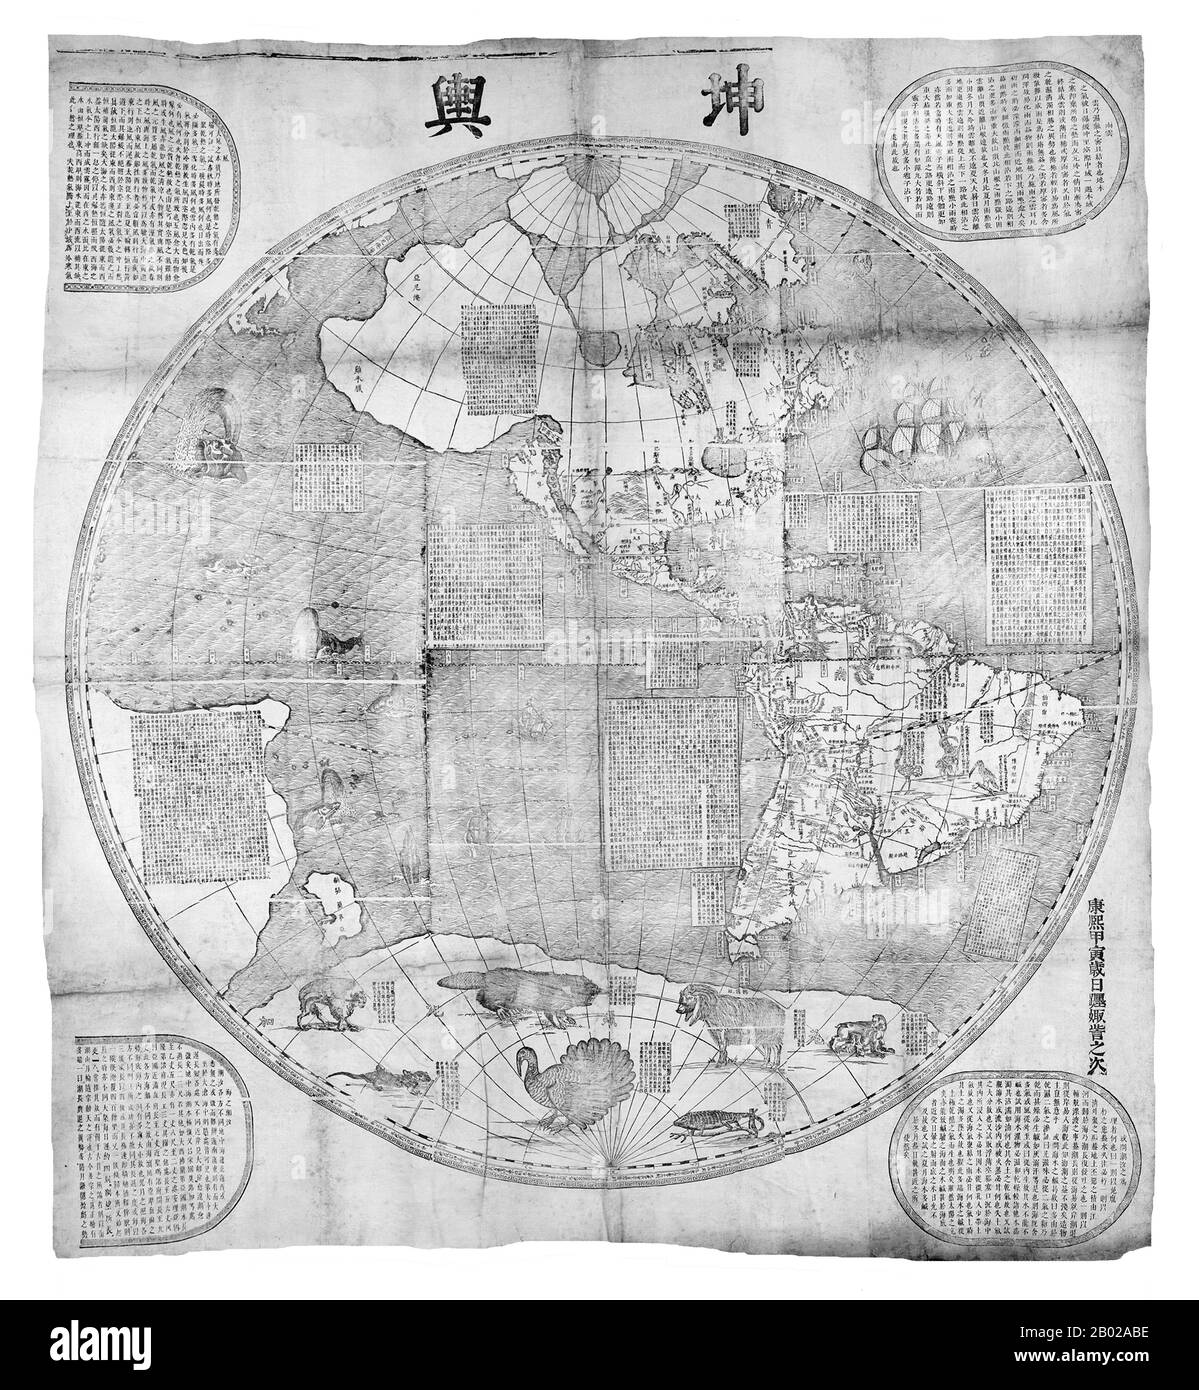 This map showing the two hemispheres of the world was made for the 2nd Qing Emperor, Kangxi (1662-1722) by the Jesuit  Ferdinand Verbiest (1623-88), in 1674. Verbiest was one of a few Jesuits who were employed at the Chinese court during the period.  Printed from woodblocks using Mercator's projection, the map was part of a larger geographical work called Kunyu tushuo (Illustrated Discussion of the Geography of the World) and called: Kunyu wanguo quantu (A Map of the Myriad Countries of the World). It was one of a series of maps produced by the Jesuits at the Court in Beijing, beginning with M Stock Photo